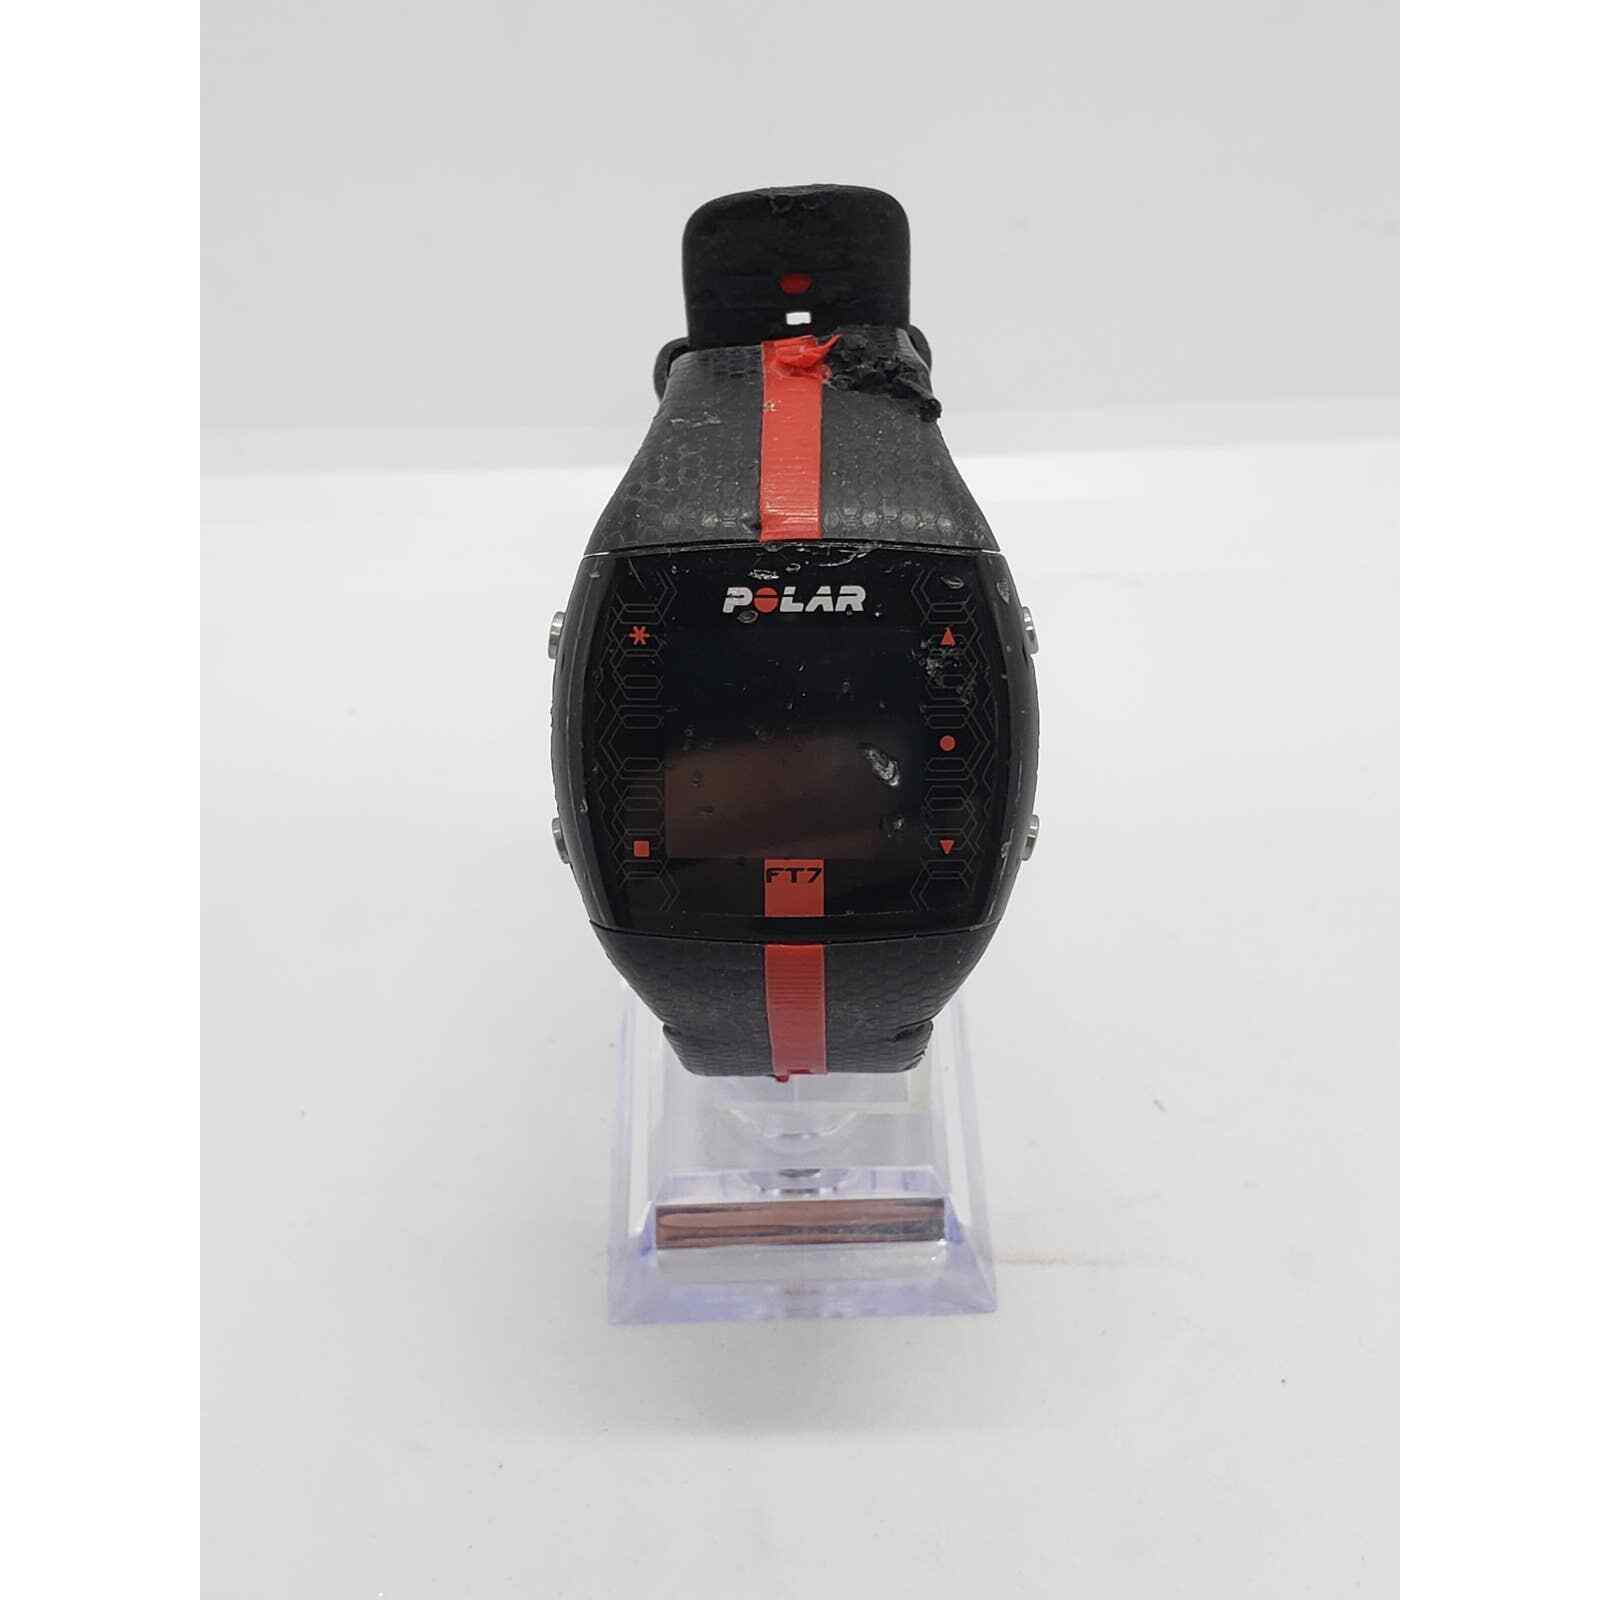 Polar men's digital watch. Black with red accent strip C2791 10180548 Sold as is